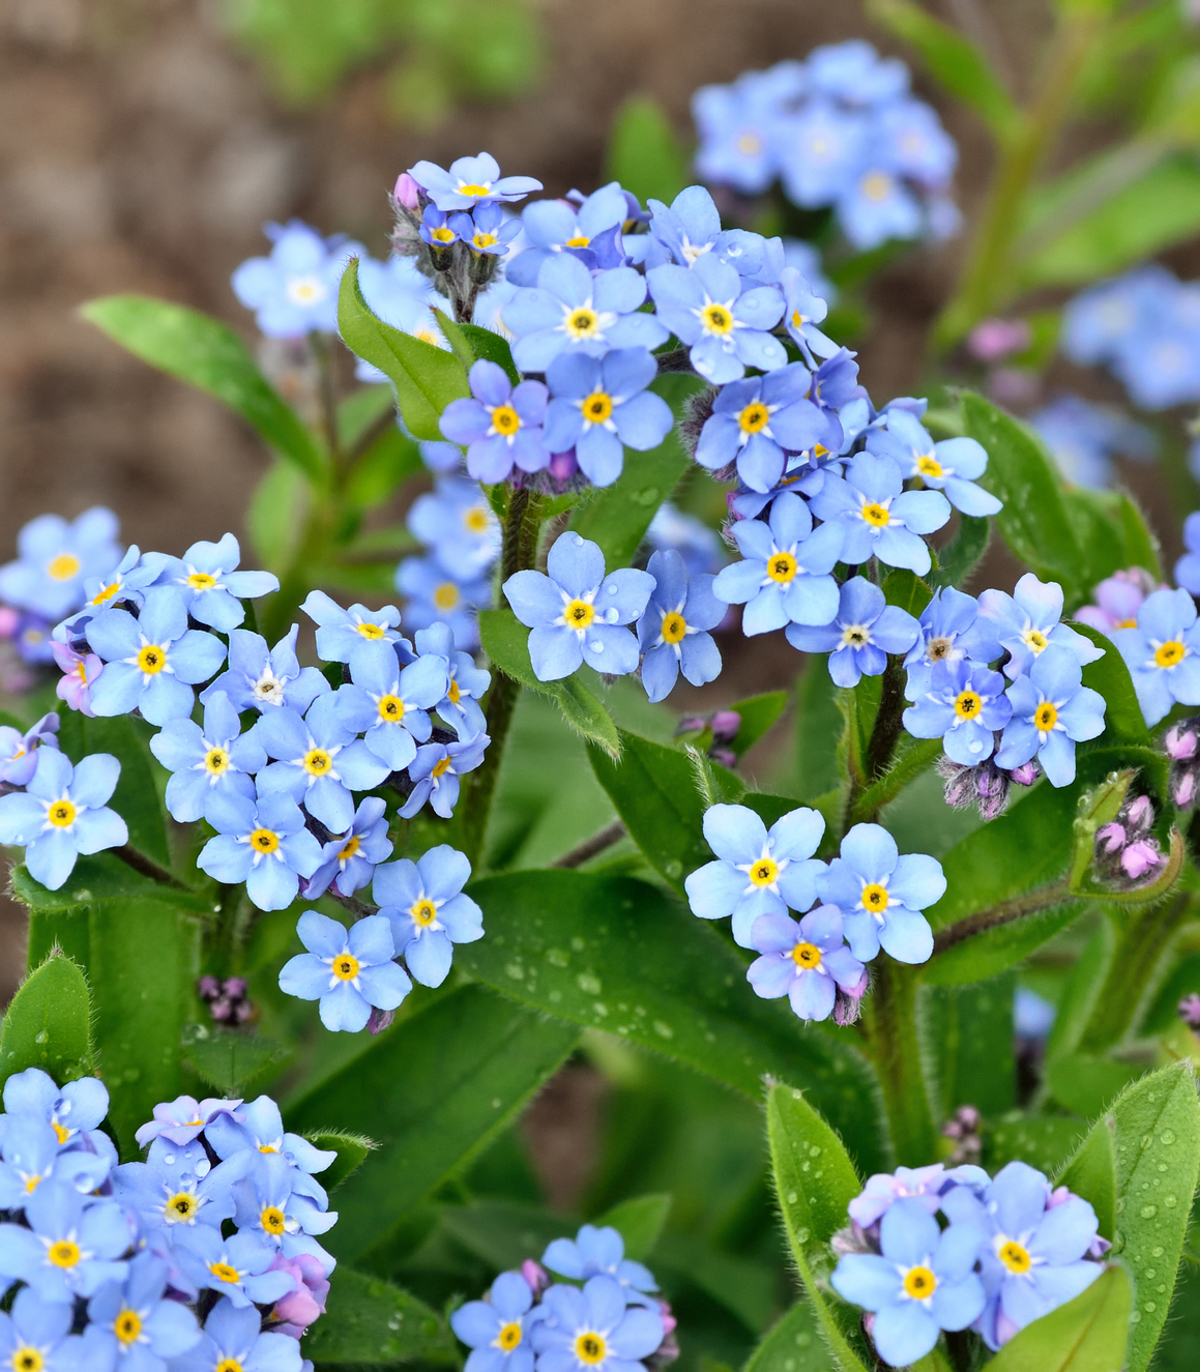 Forget-Me-Nots: Tips and Symbolism of These Pretty Blue Flowers